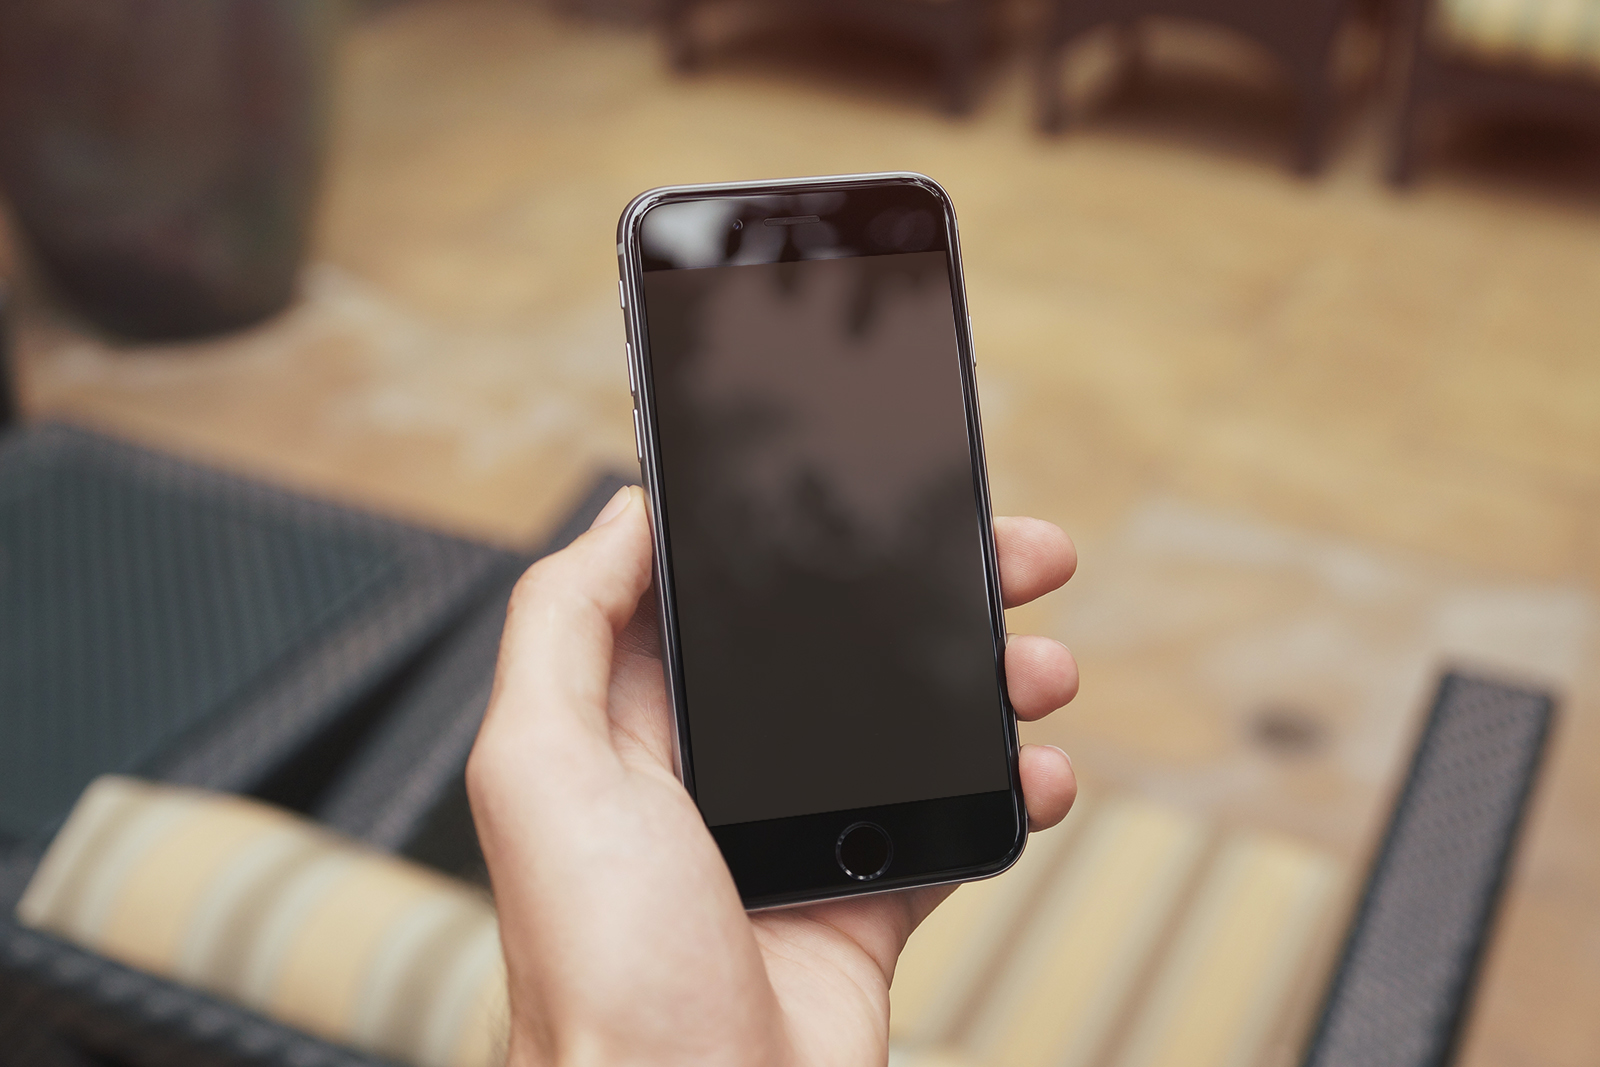 iPhone 6 Plus In Woman's Hand Mockup